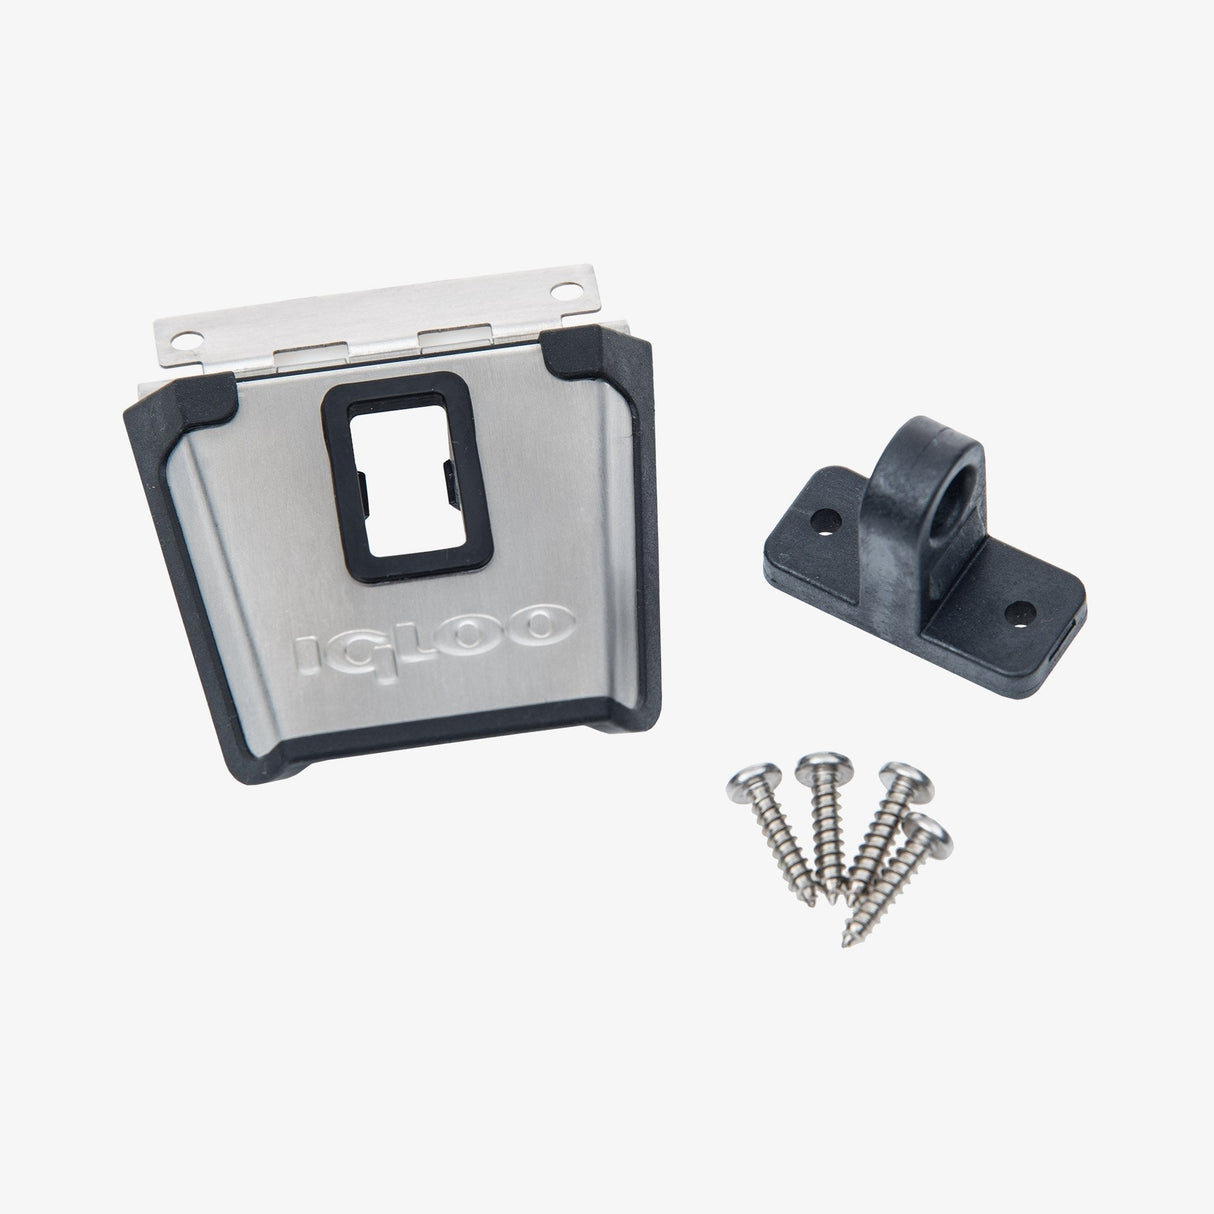 Igloo Stainless Steel Lockable Latch Universal Fit